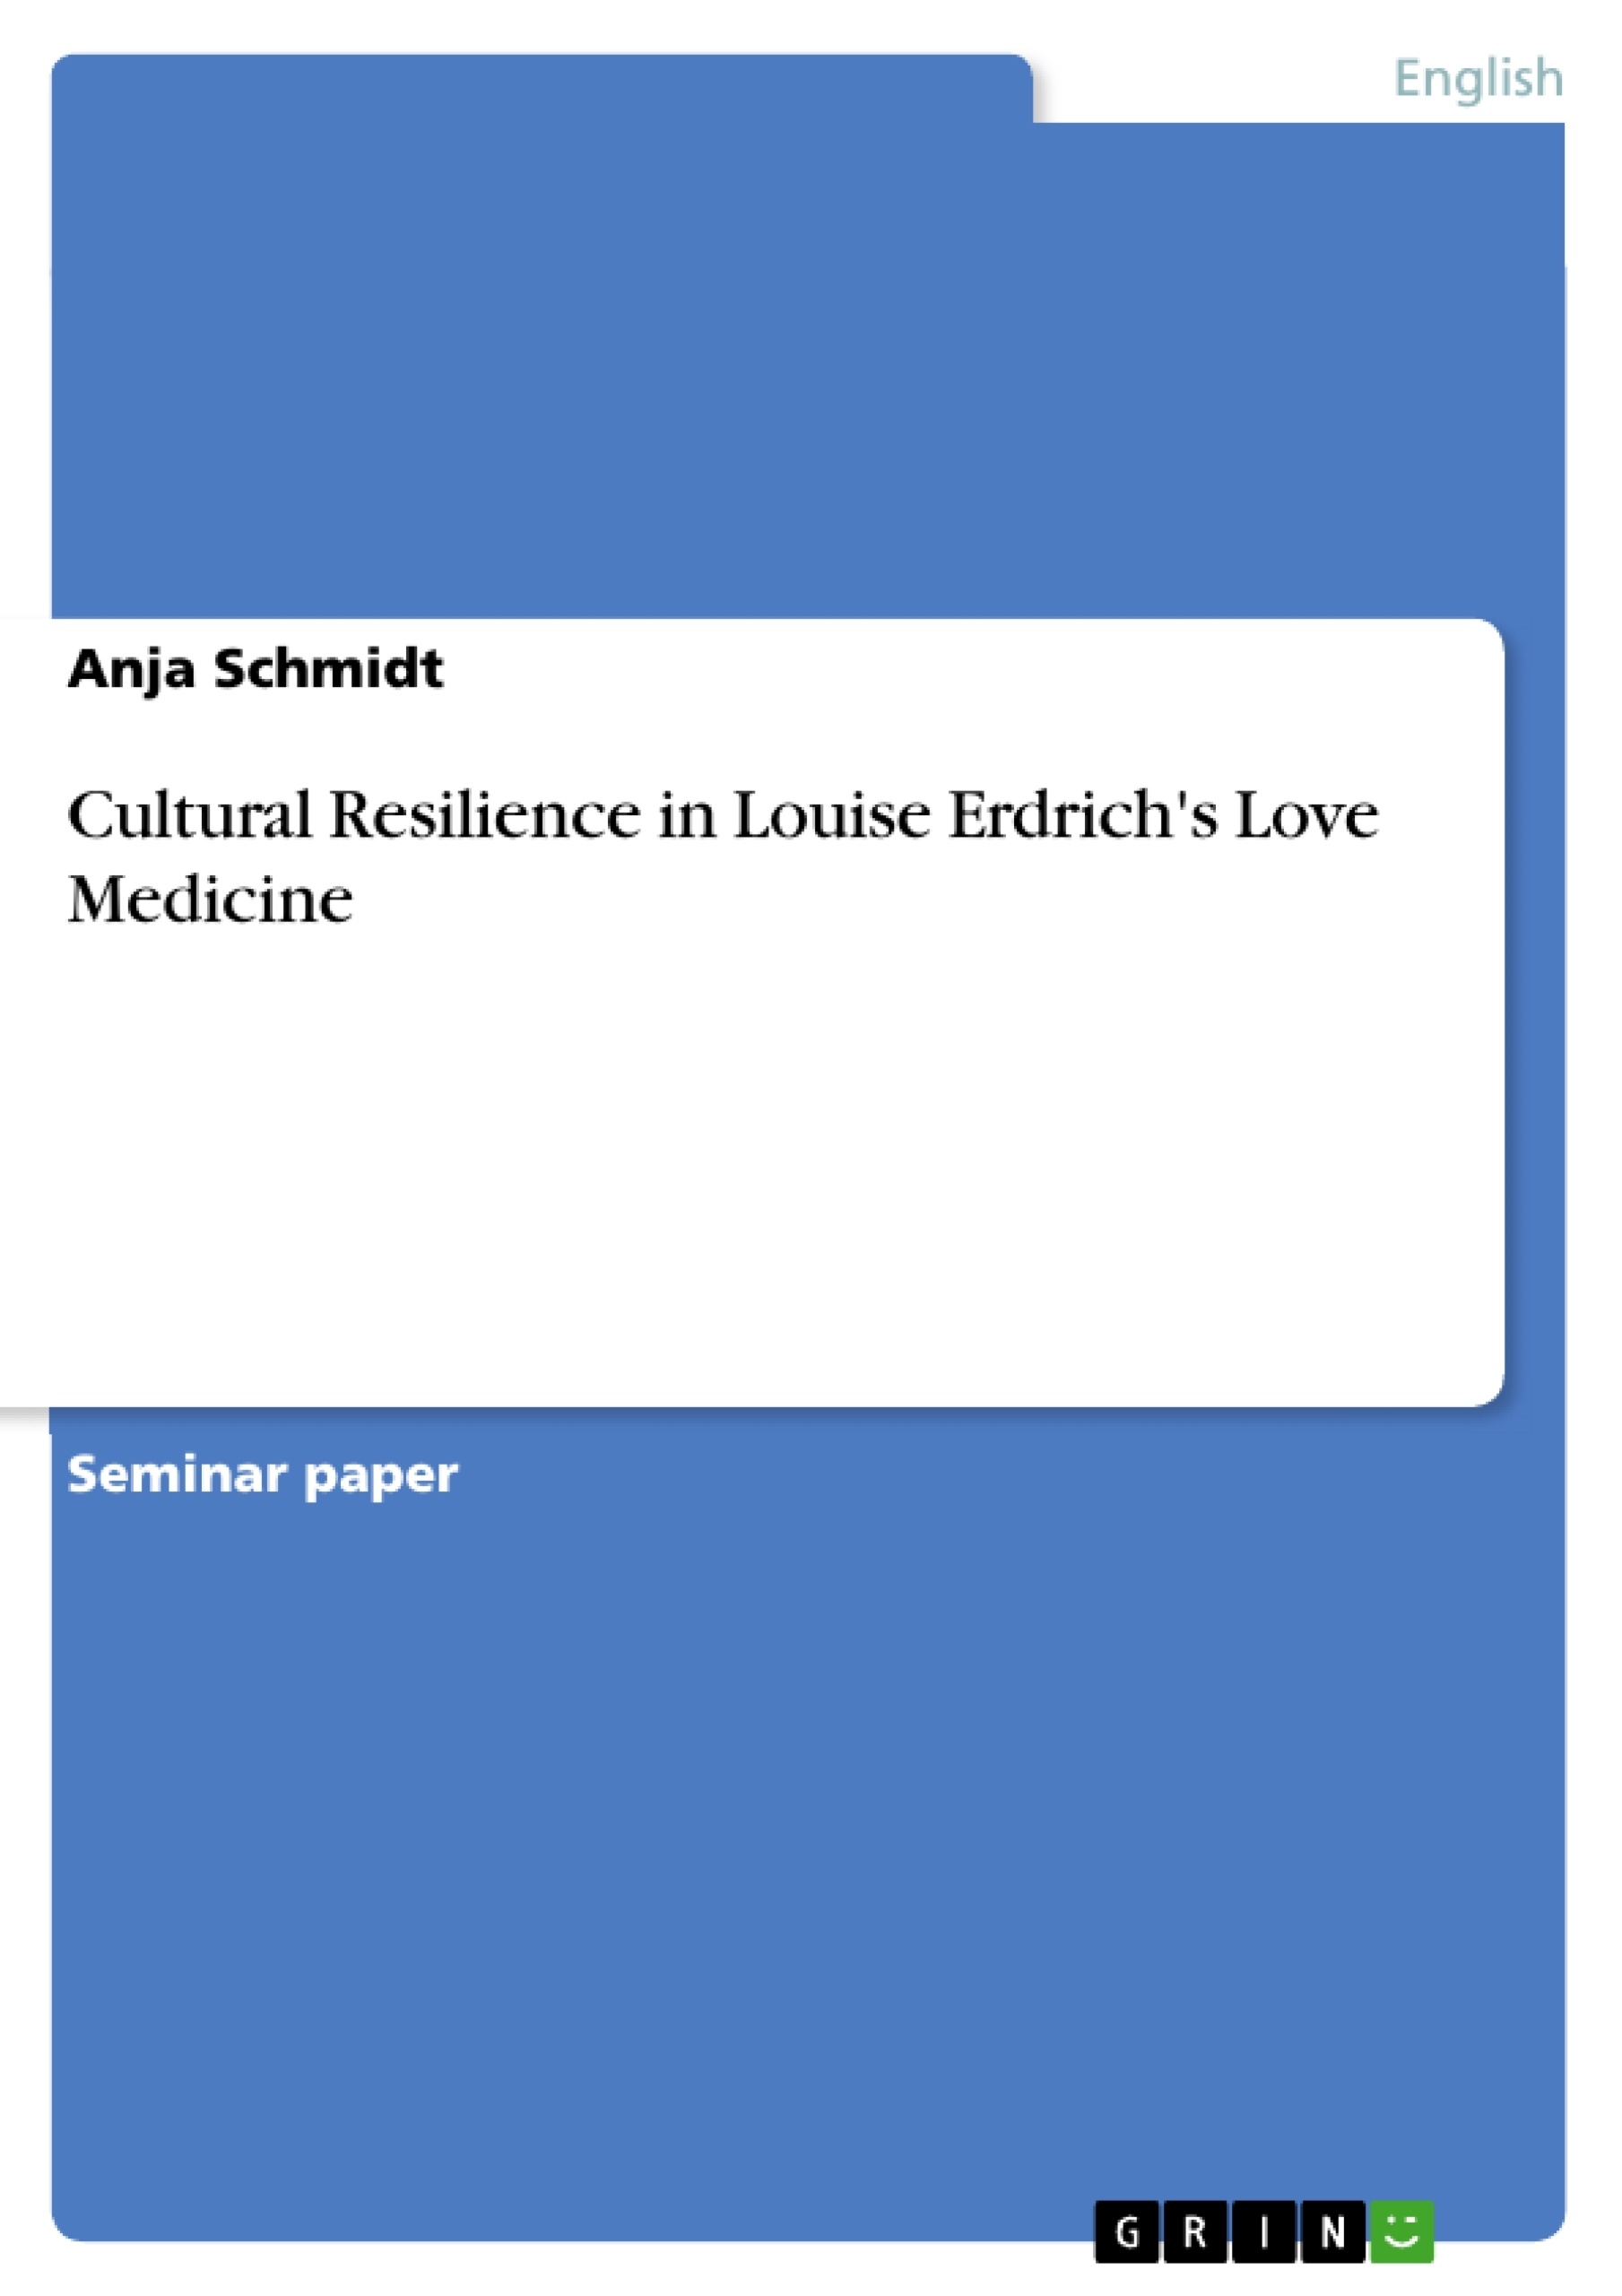 Title: Cultural Resilience in Louise Erdrich's Love Medicine